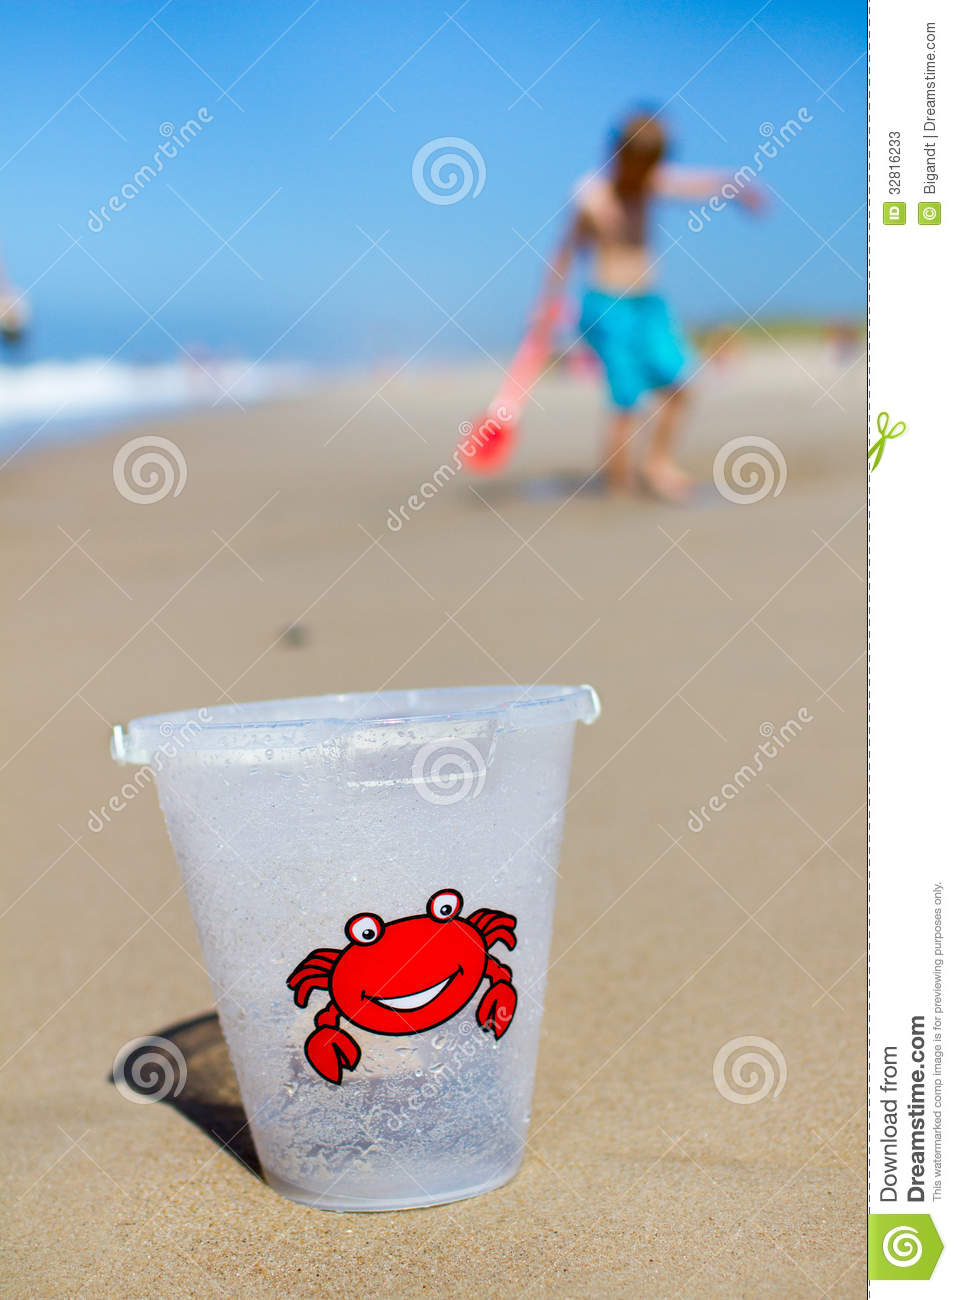 Plastic Toy Bucket With Red Crab On The Front Is In Focus In Front Of